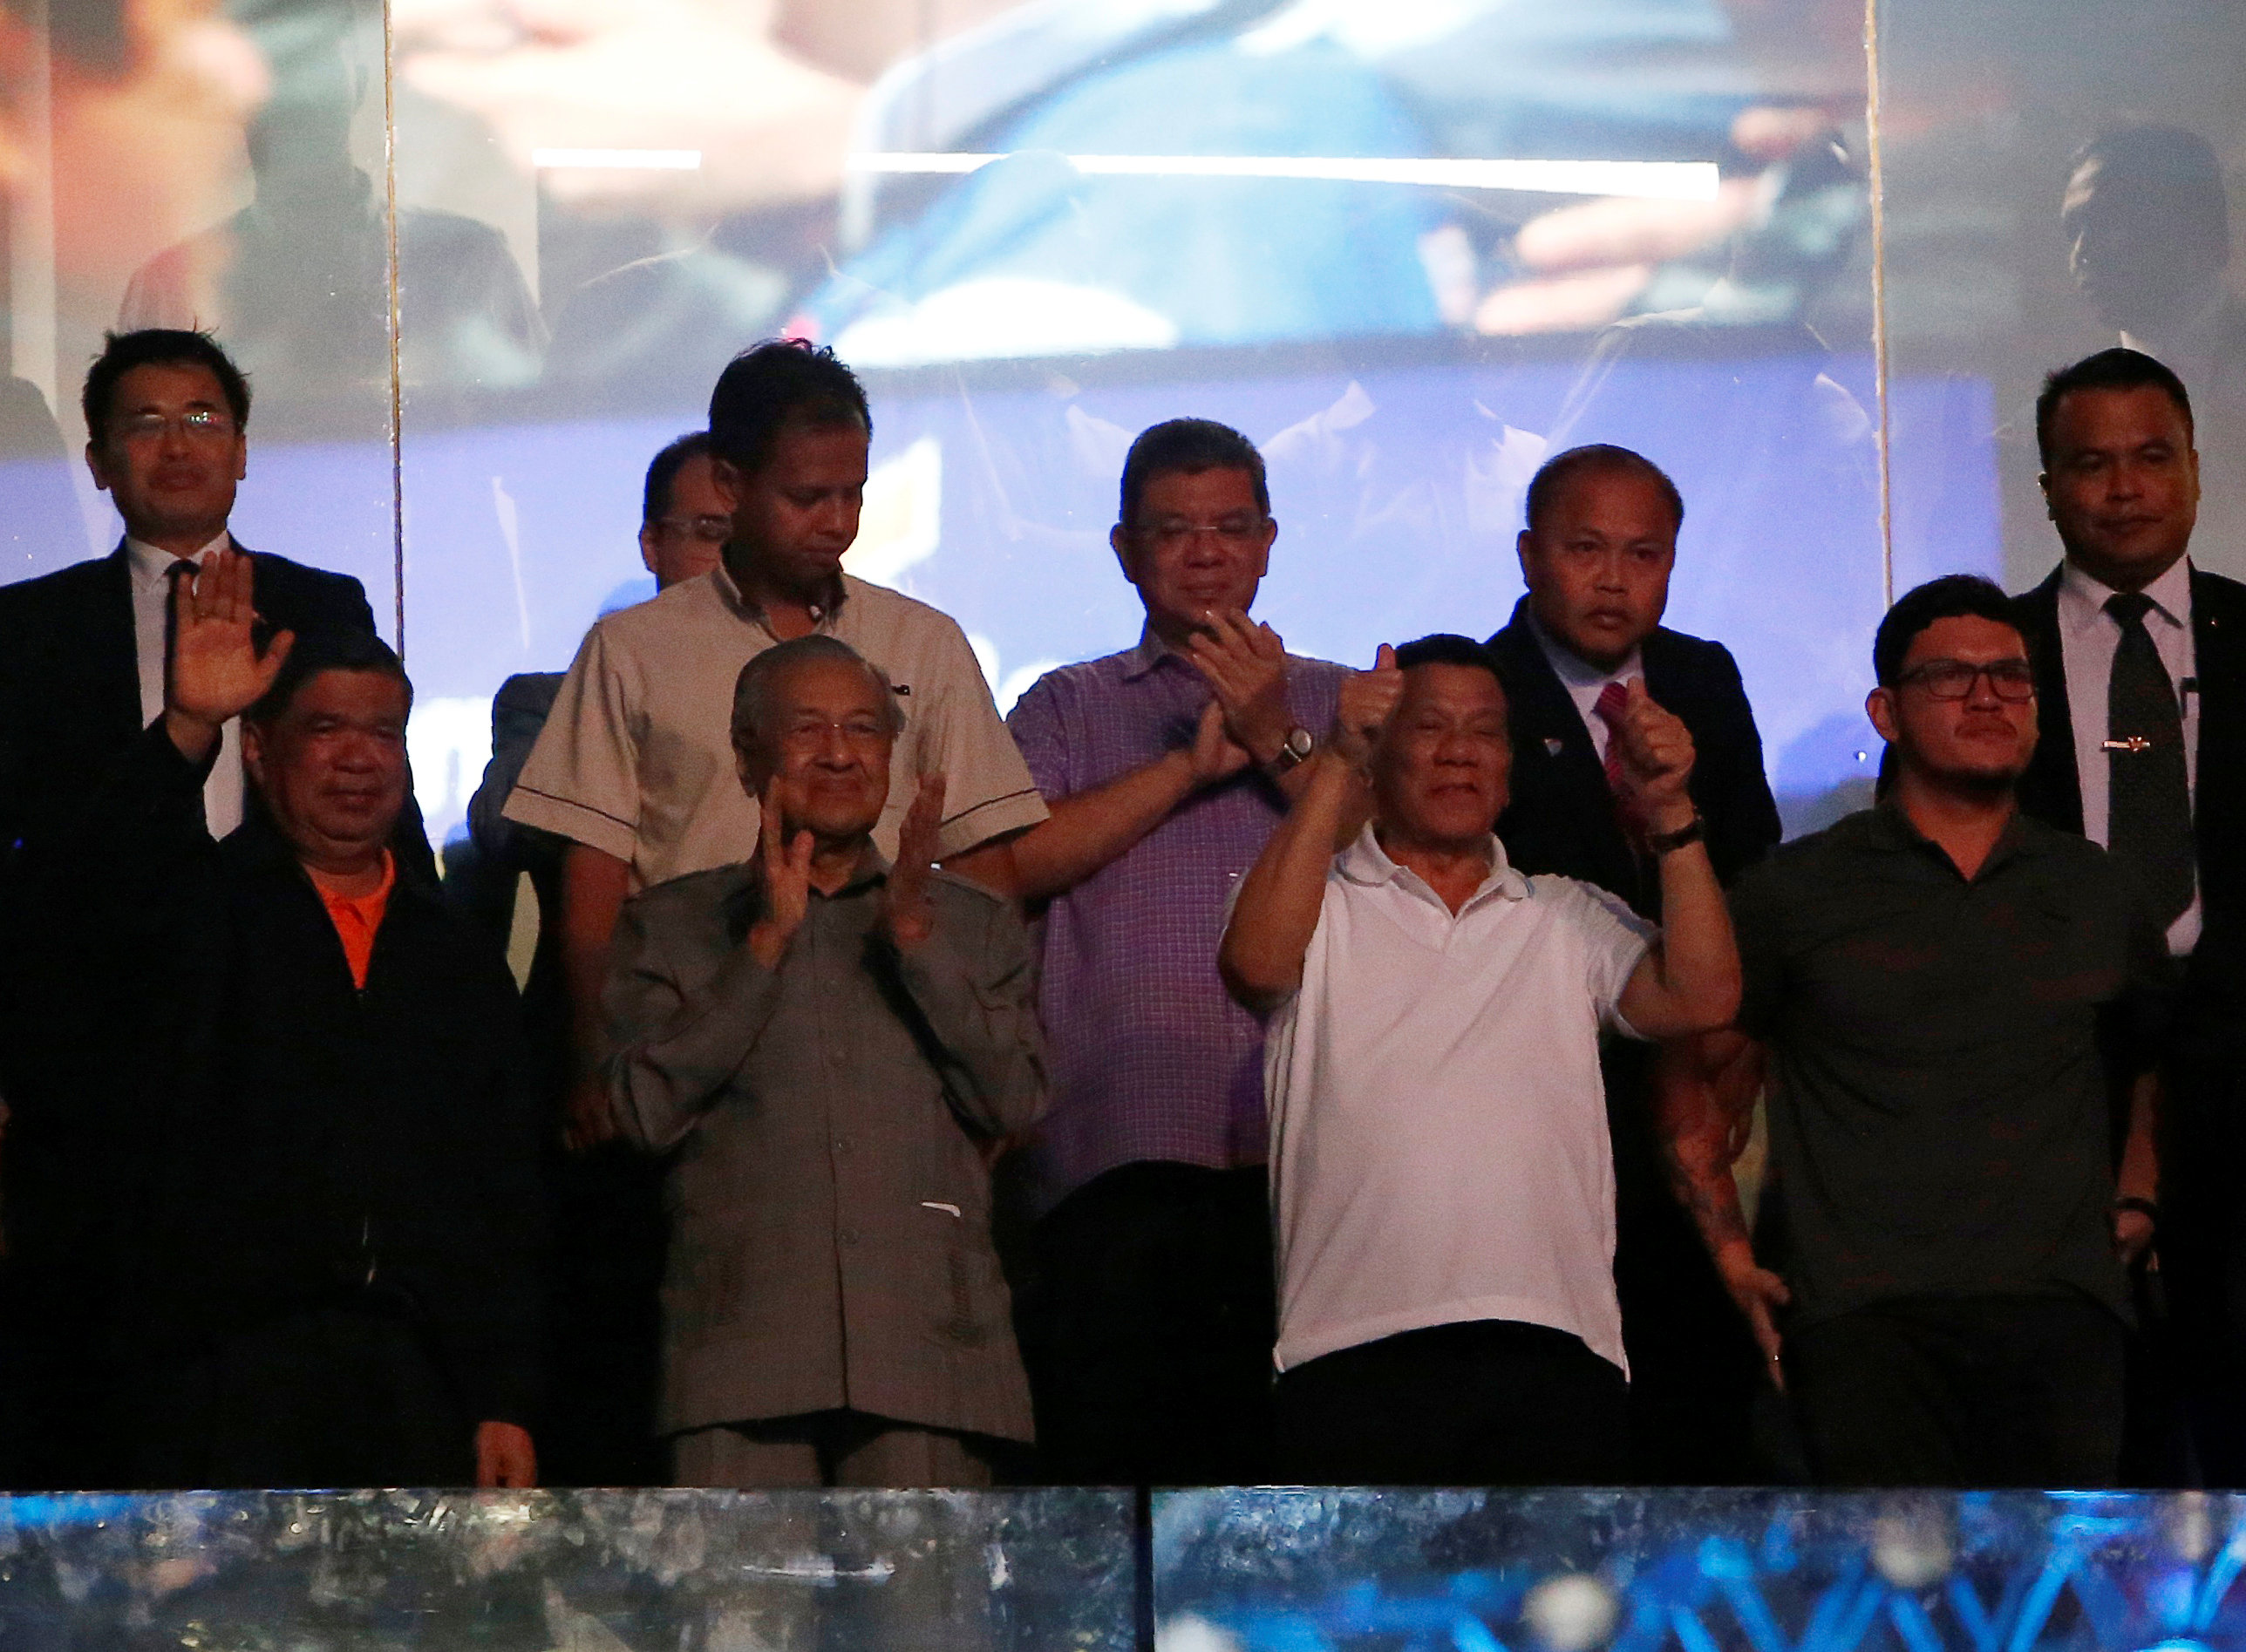 ​Philippines goes almost ‘crimeless’ during Manny Pacquiao’s match